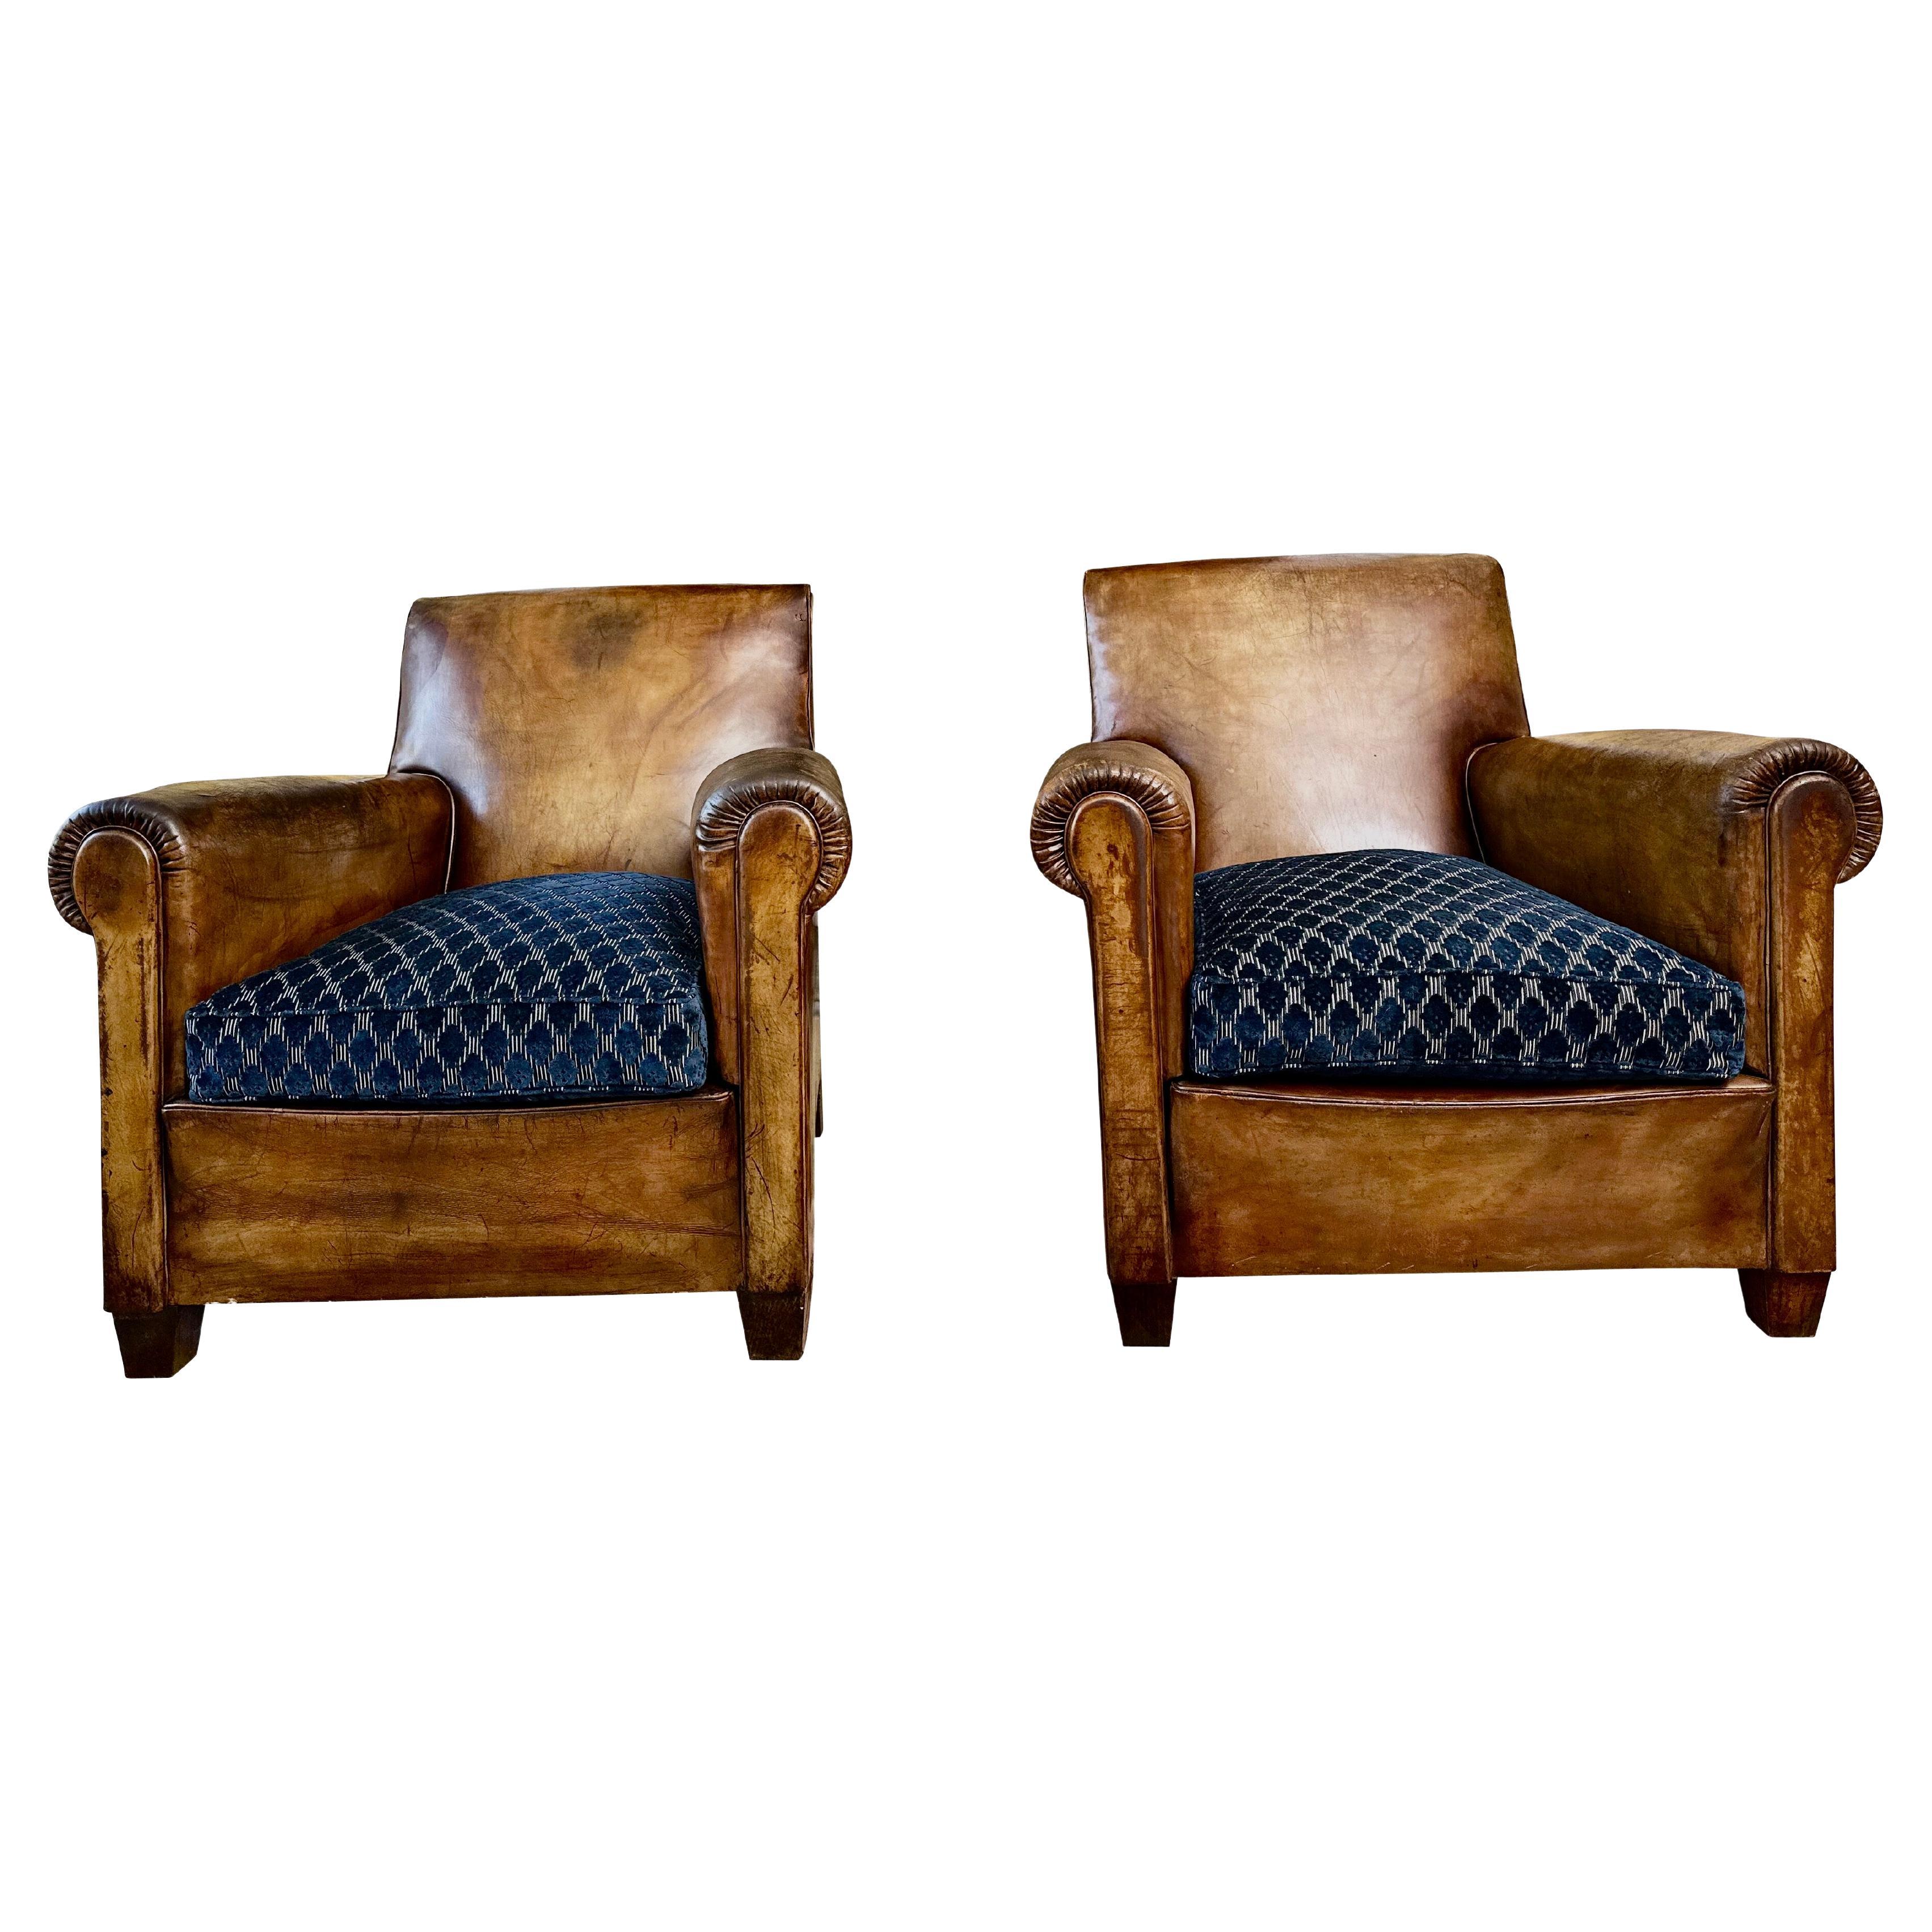 1930's Vintage Art Deco Leather Club Chairs - A Pair For Sale